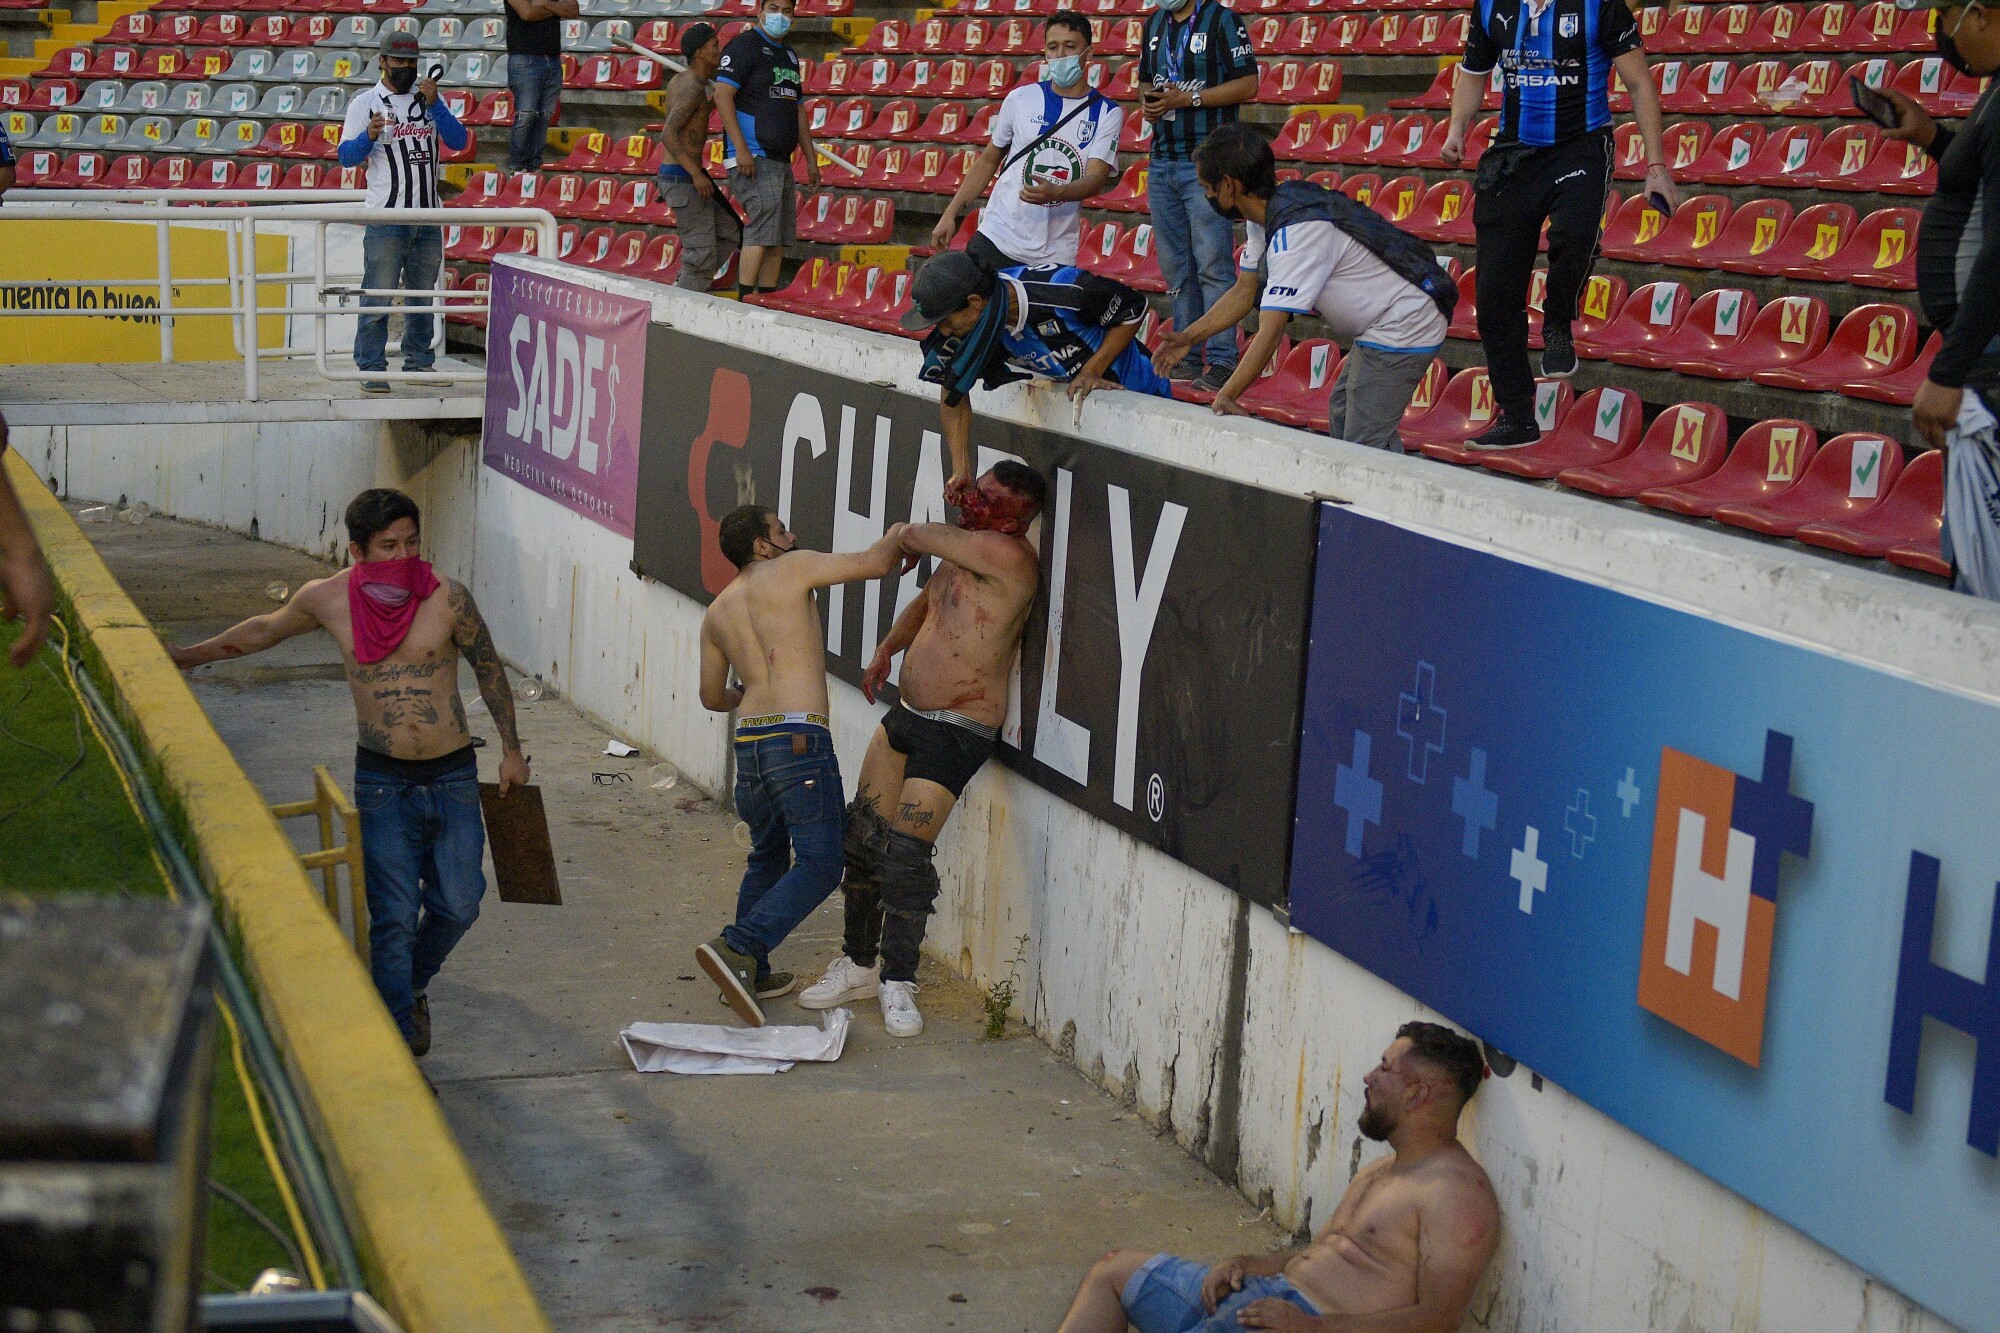 Fans were beaten and stripped of their clothing during a bloody brawl on March 5.